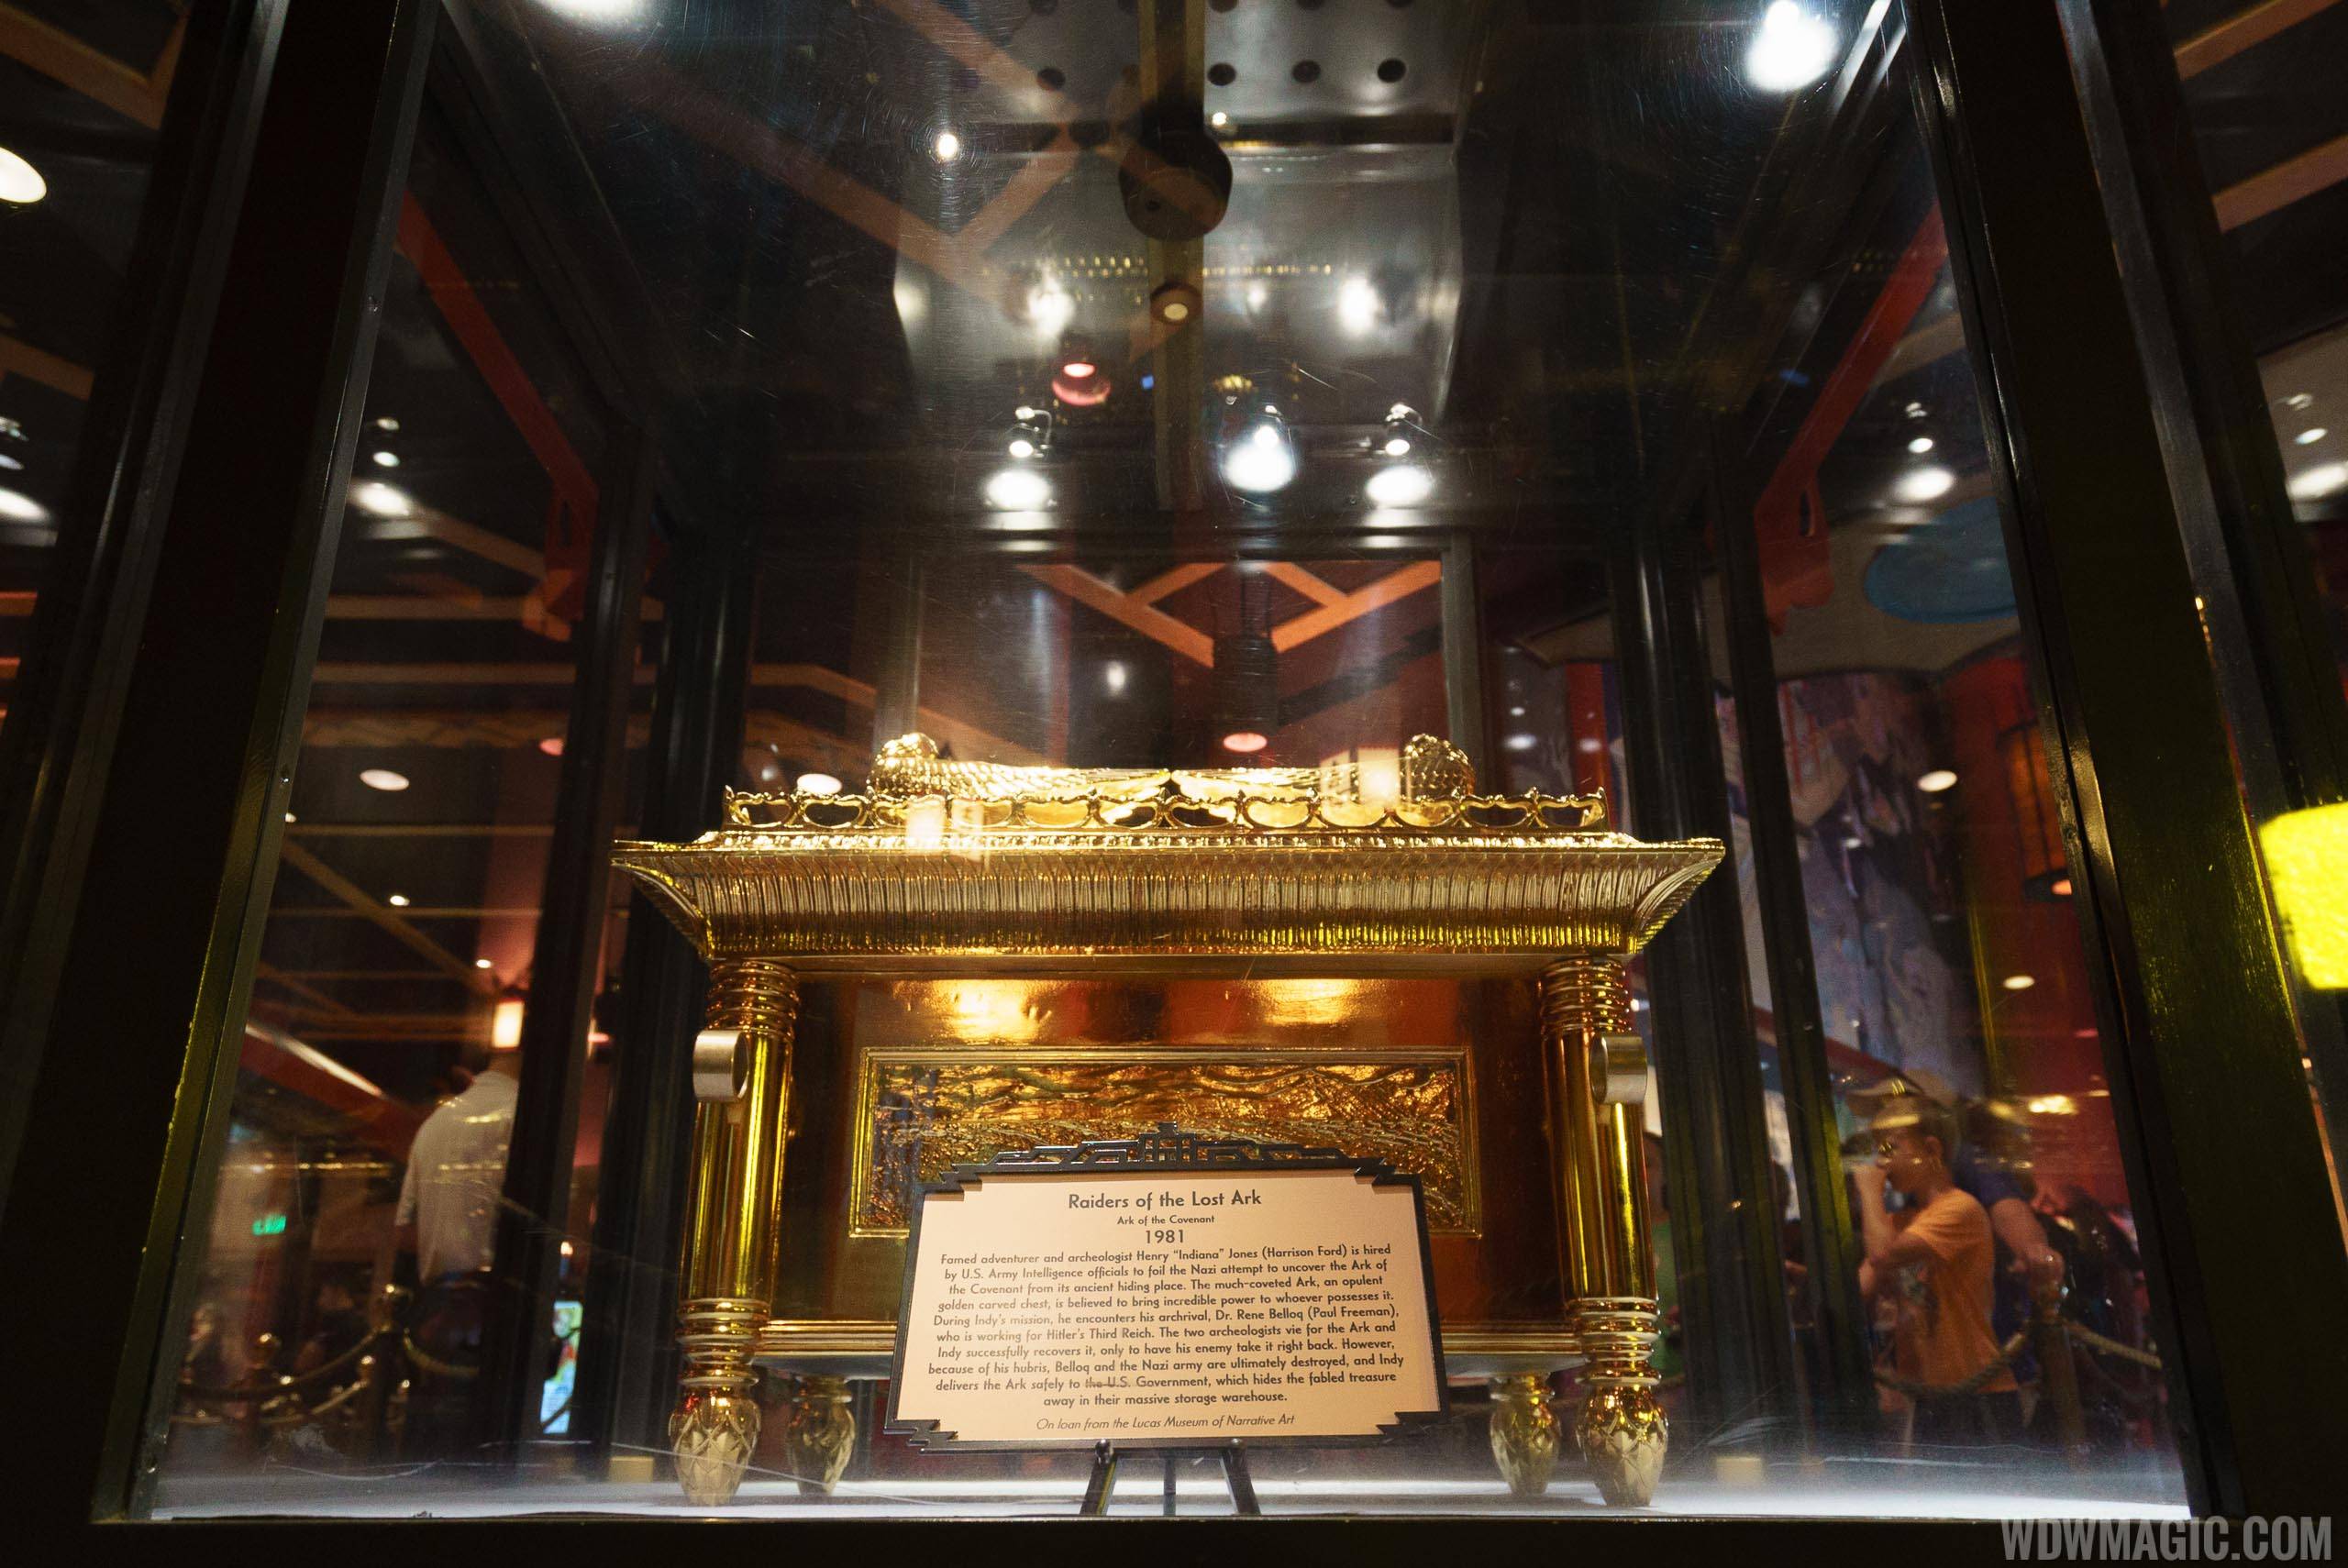 The Great Movie Ride - Raiders of the Lost Ark exhibit in the queue